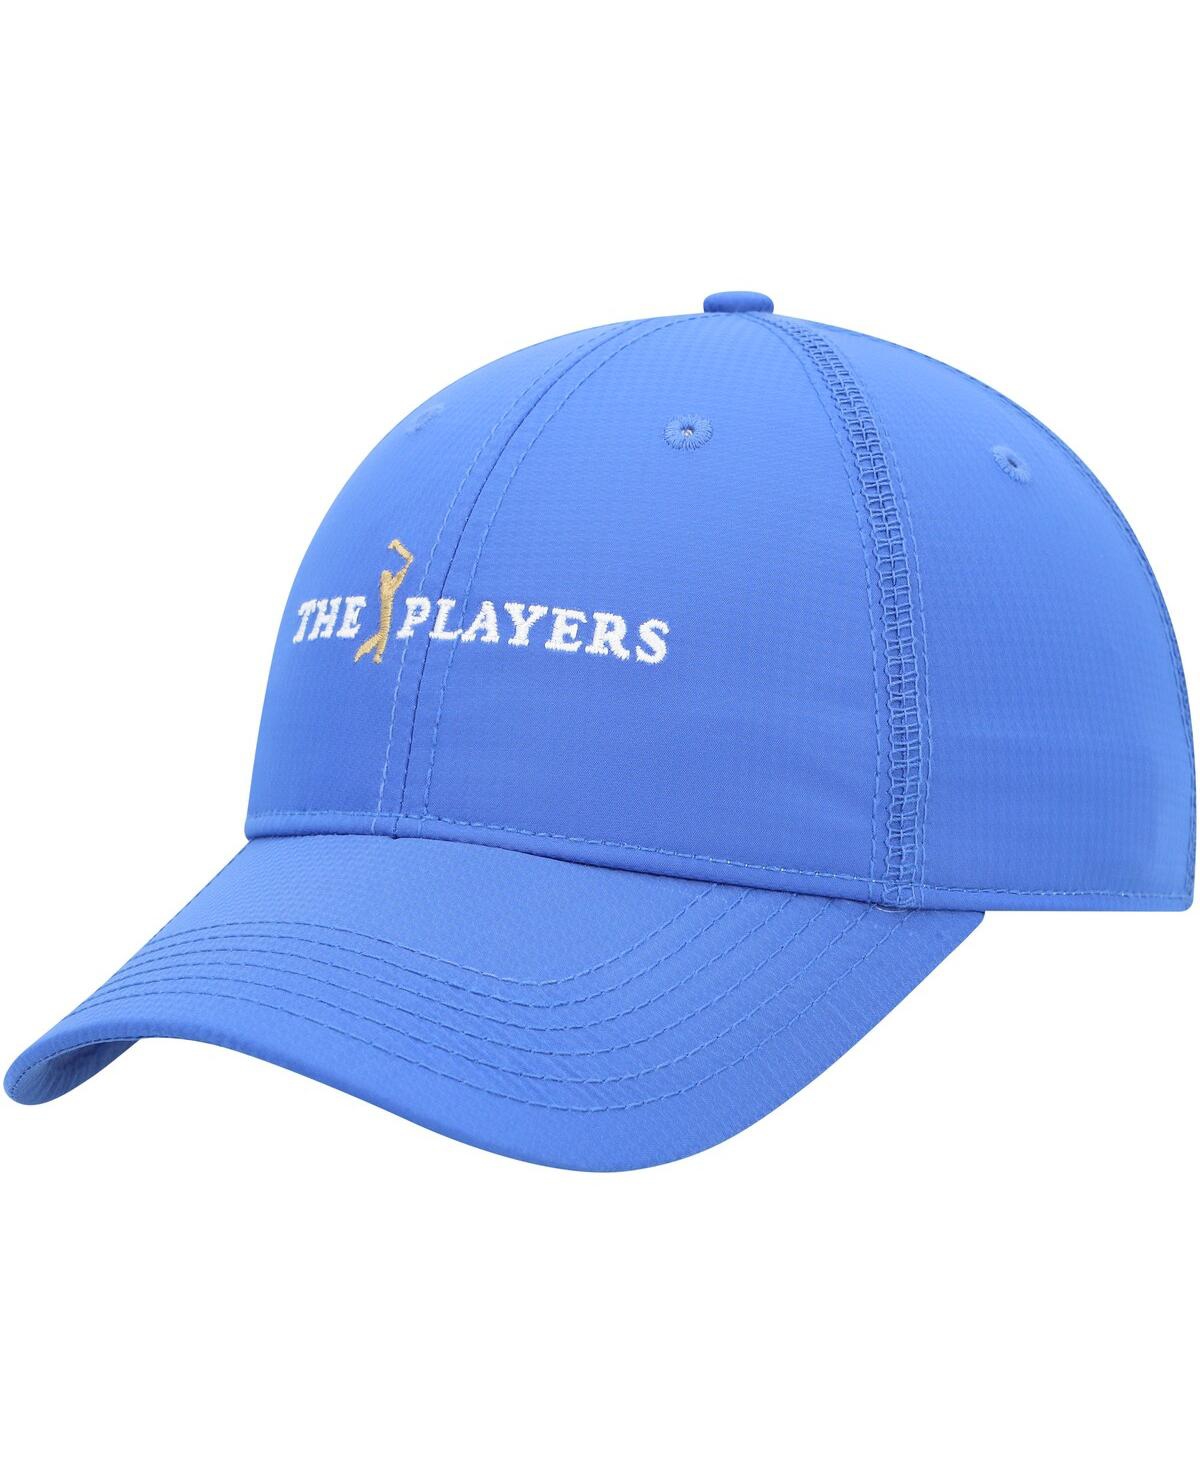 Women's Ahead Royal The Players Marion Adjustable Hat - Royal